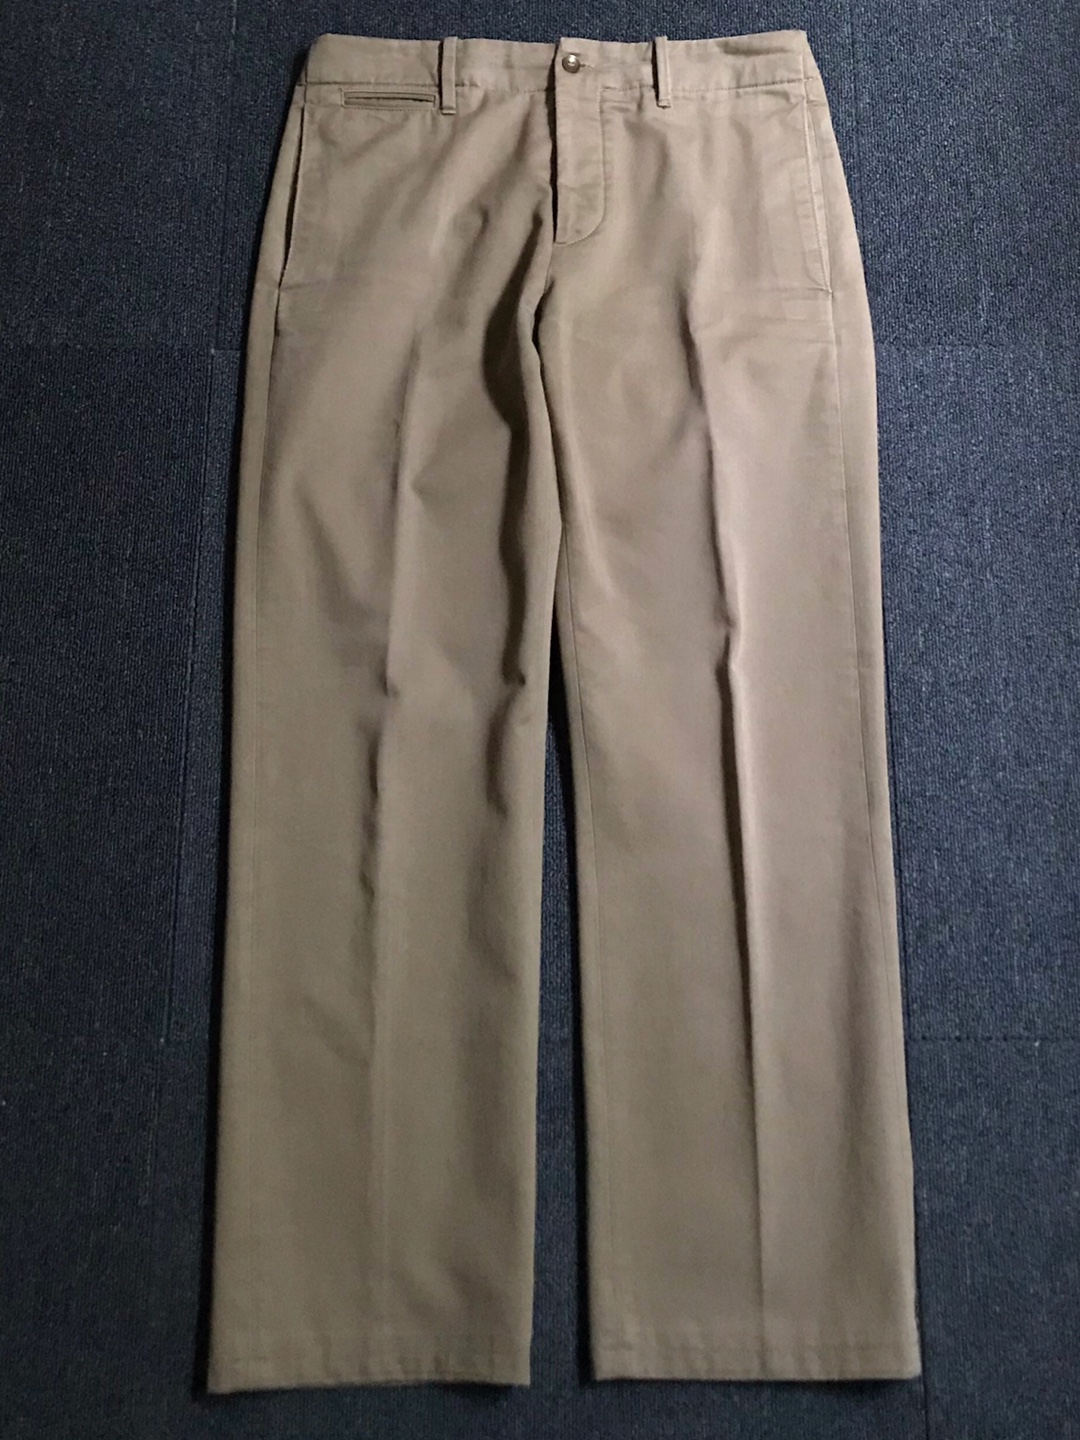 ychai cotton twill pants Italy made (30 size,